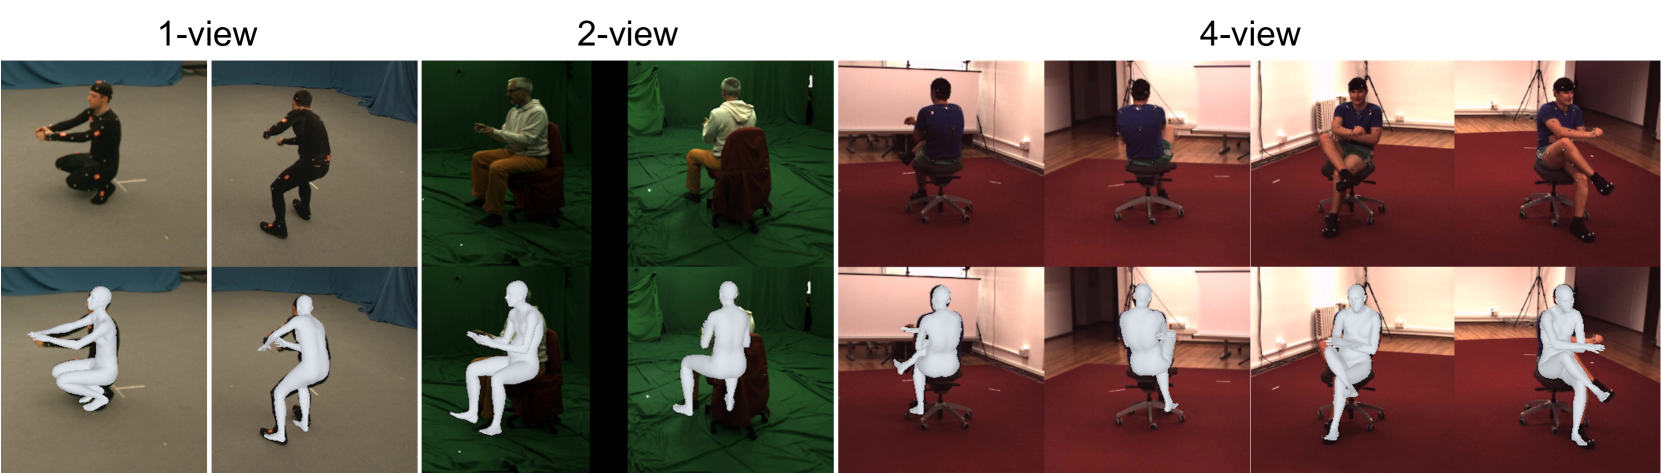 Human Mesh Recovery from Arbitrary Multi-view Images